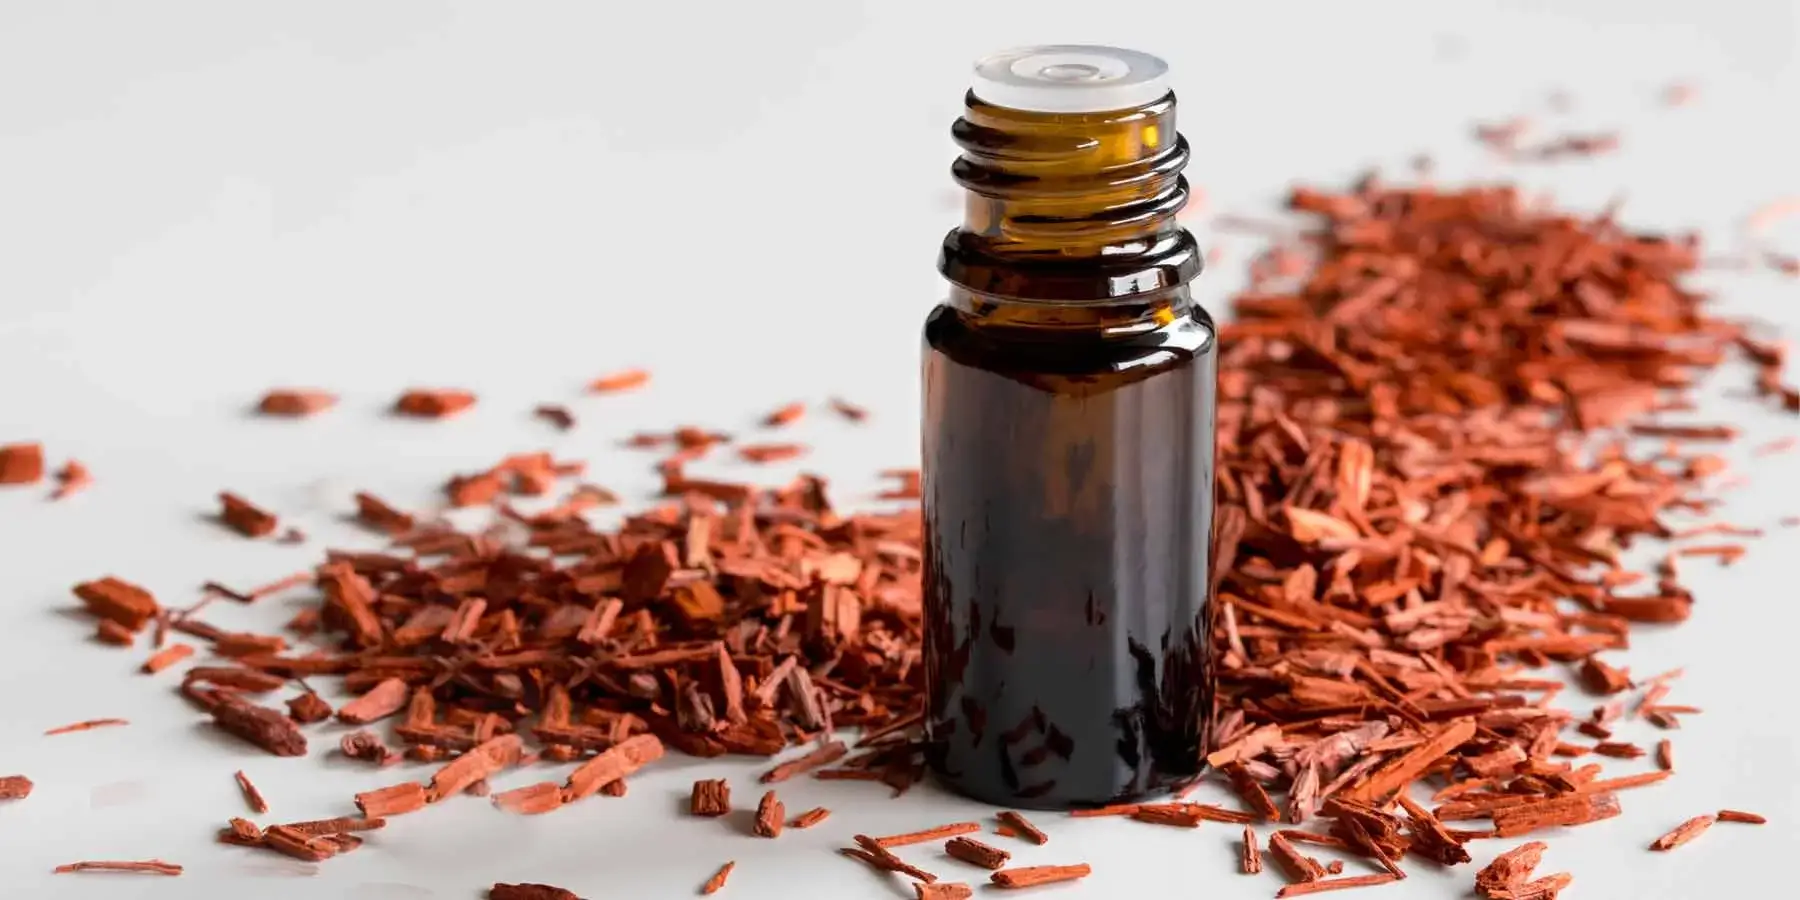 Benefits and Uses of Sandalwood Oil